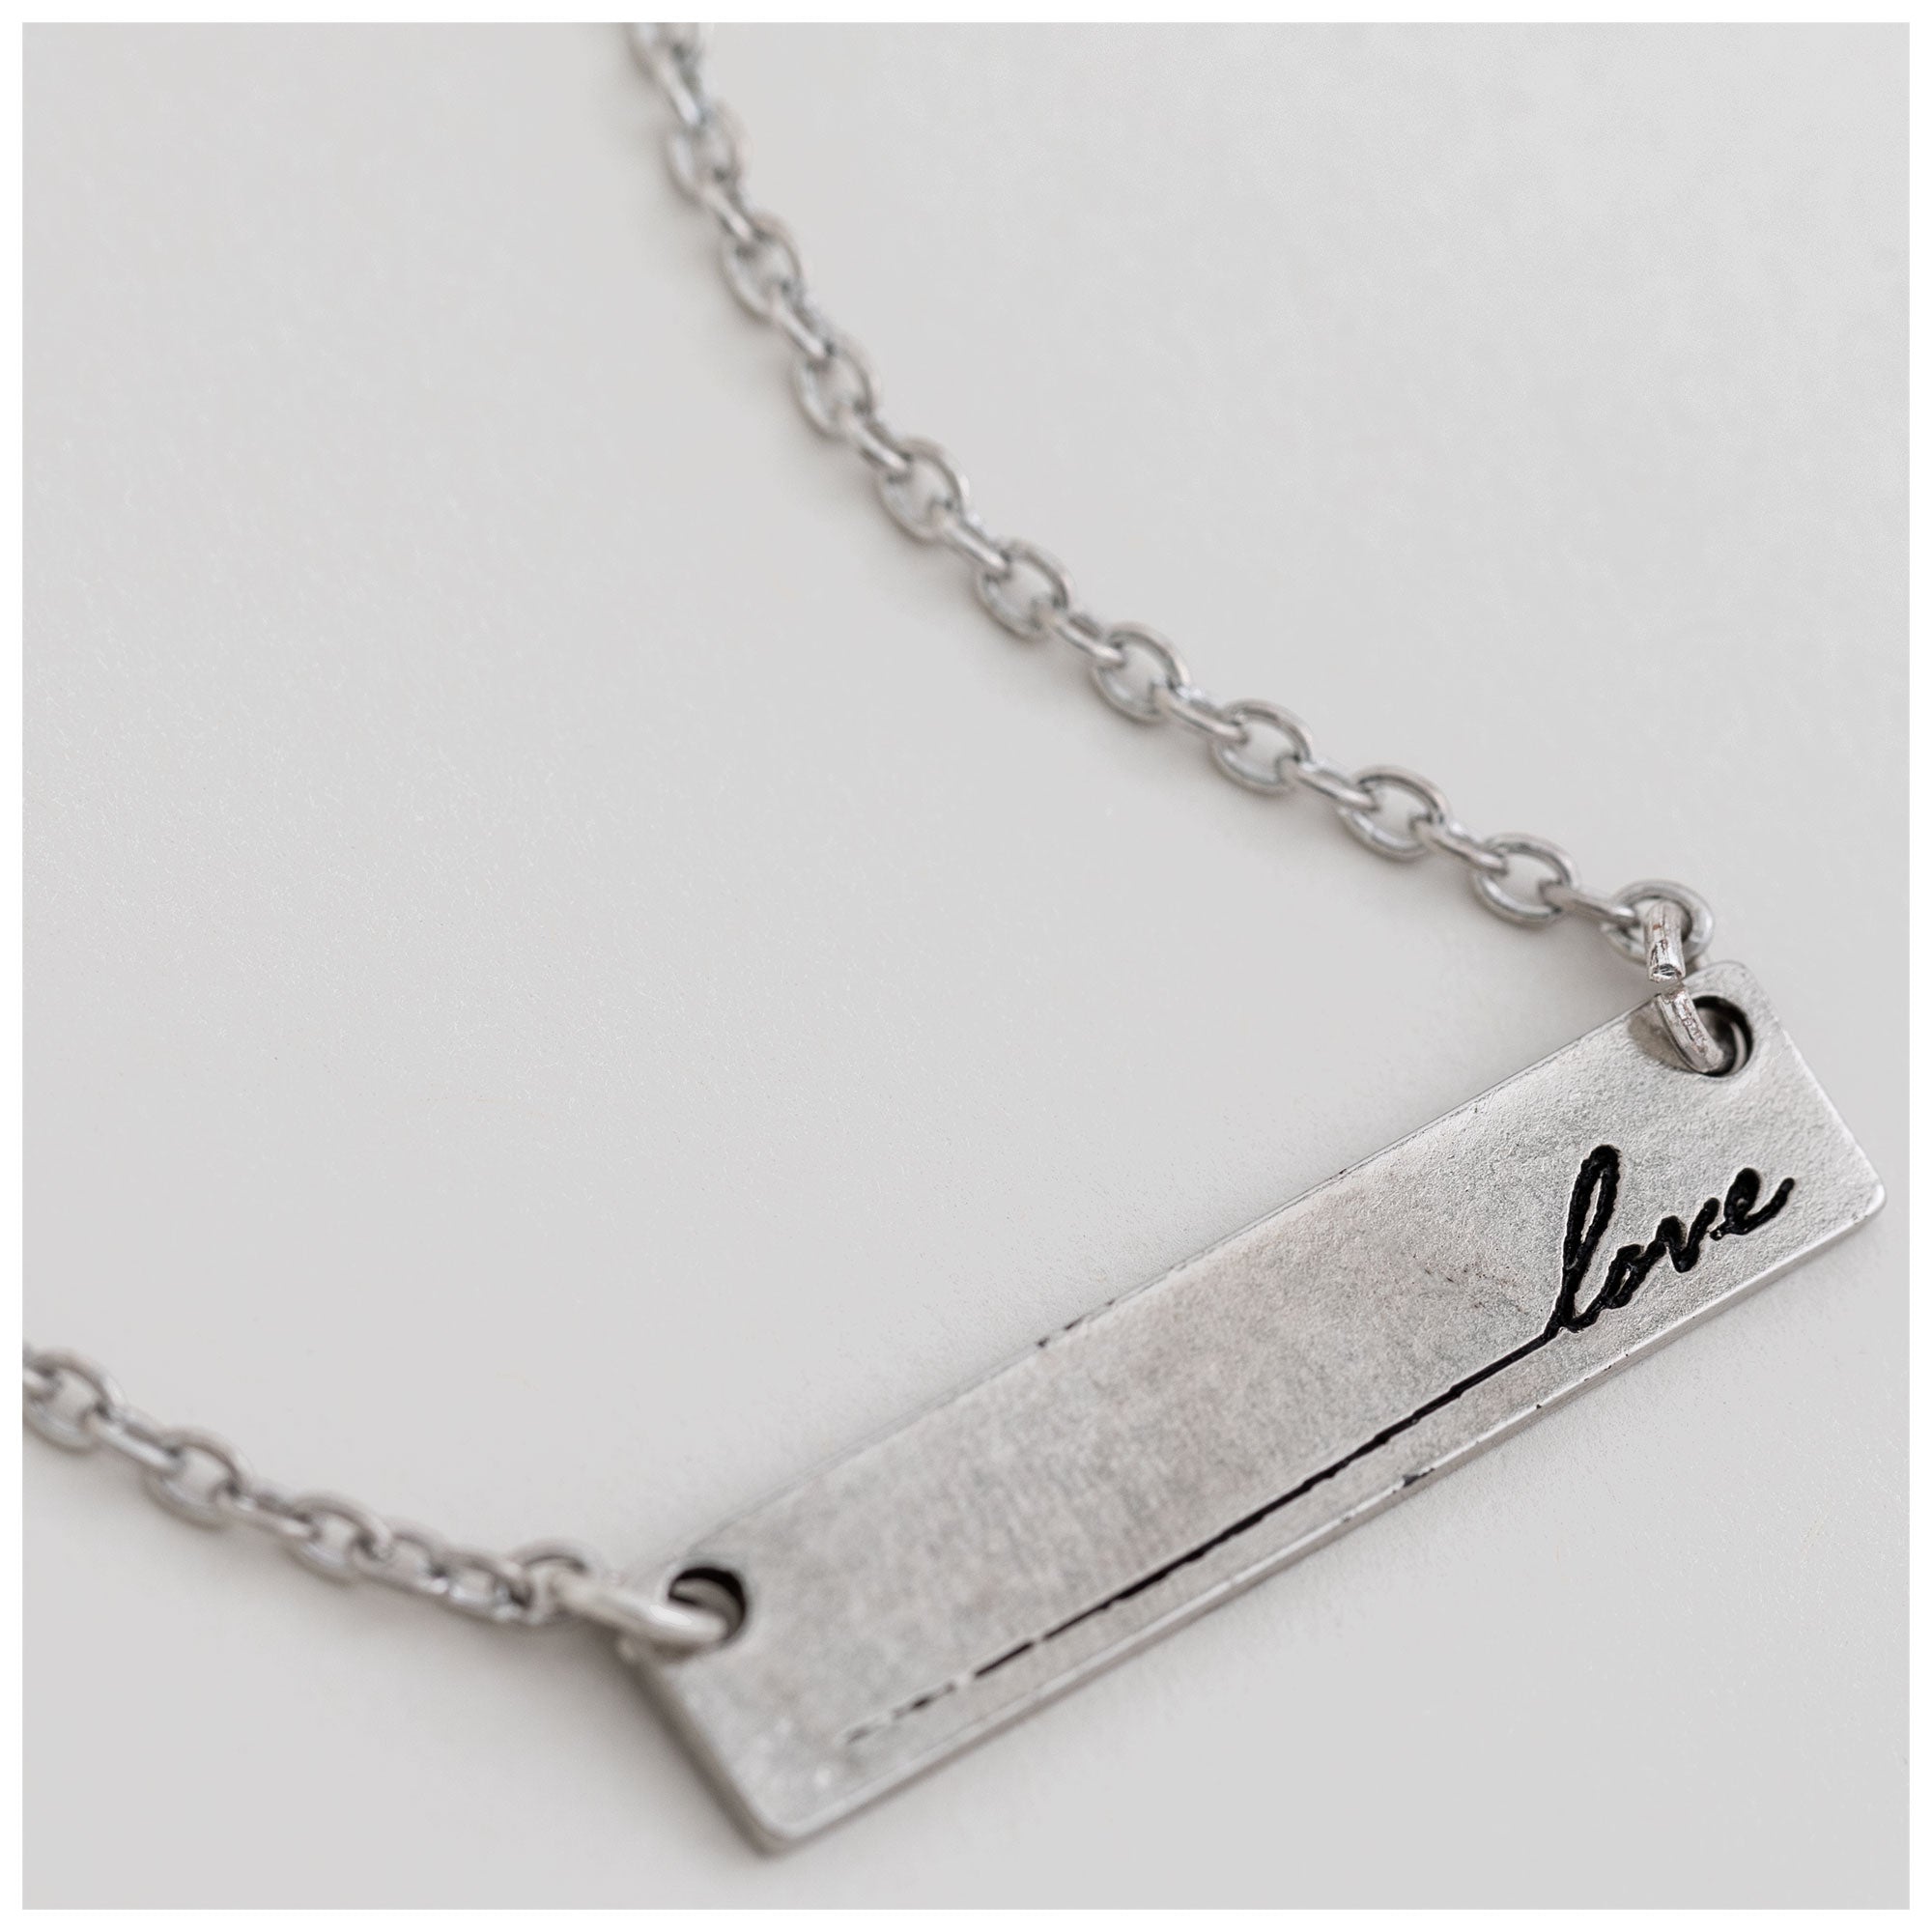 Life's Gifts Necklace - Love